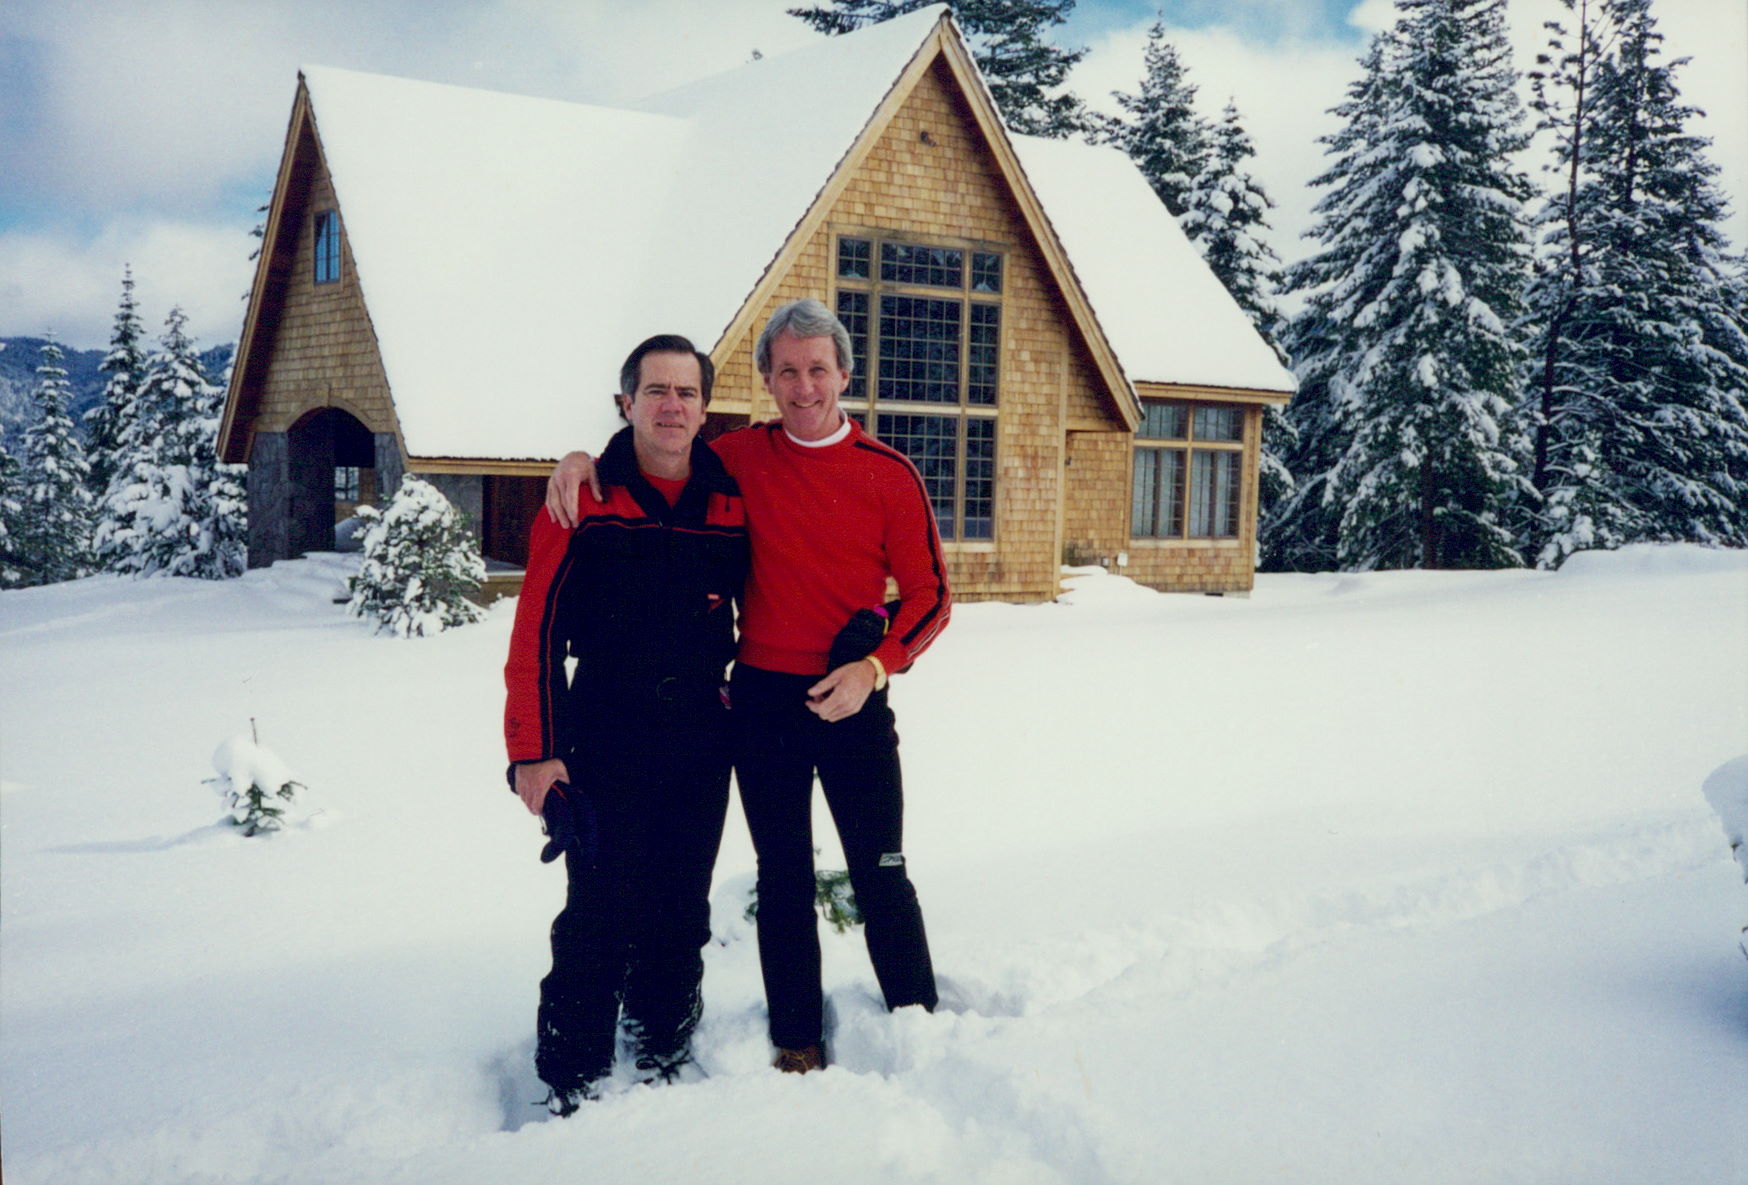 John and Jim outside the snow-covered cabin, 1994.